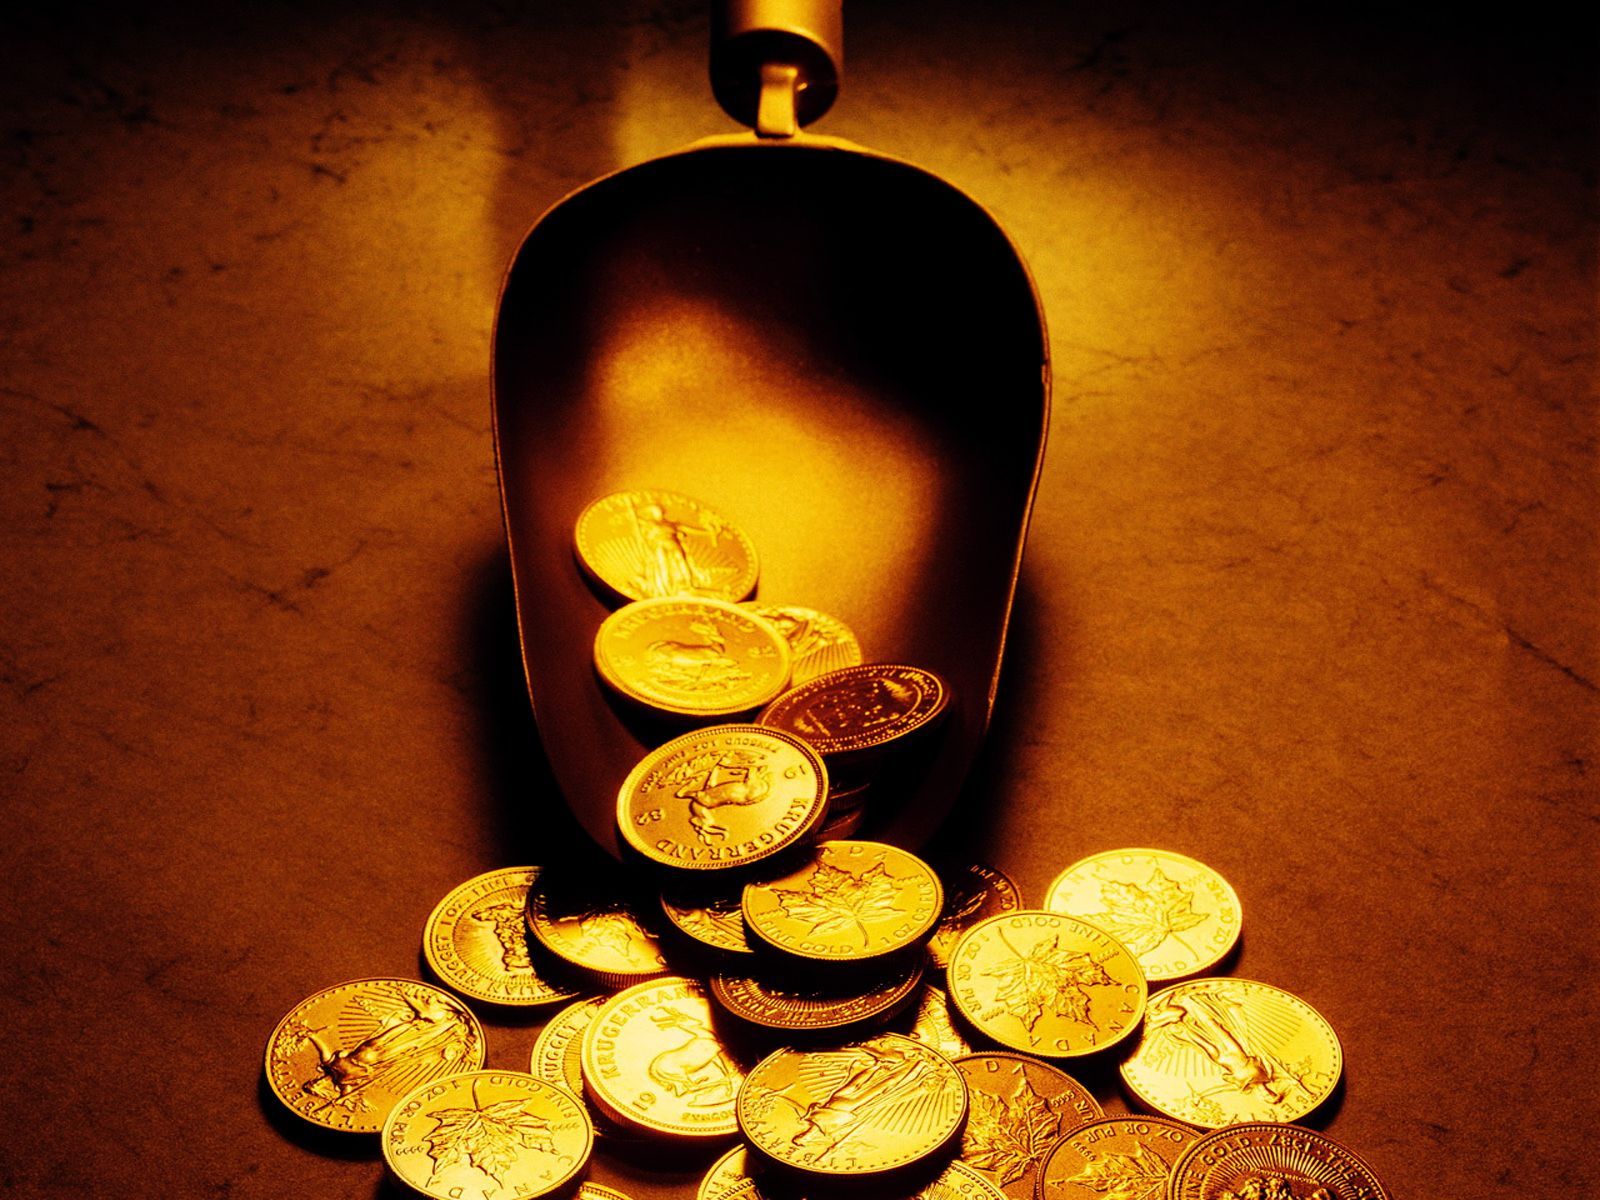 Coins Wallpaper. MSP Star Coins Wallpaper, Coins Wallpaper and Golden Coins Background